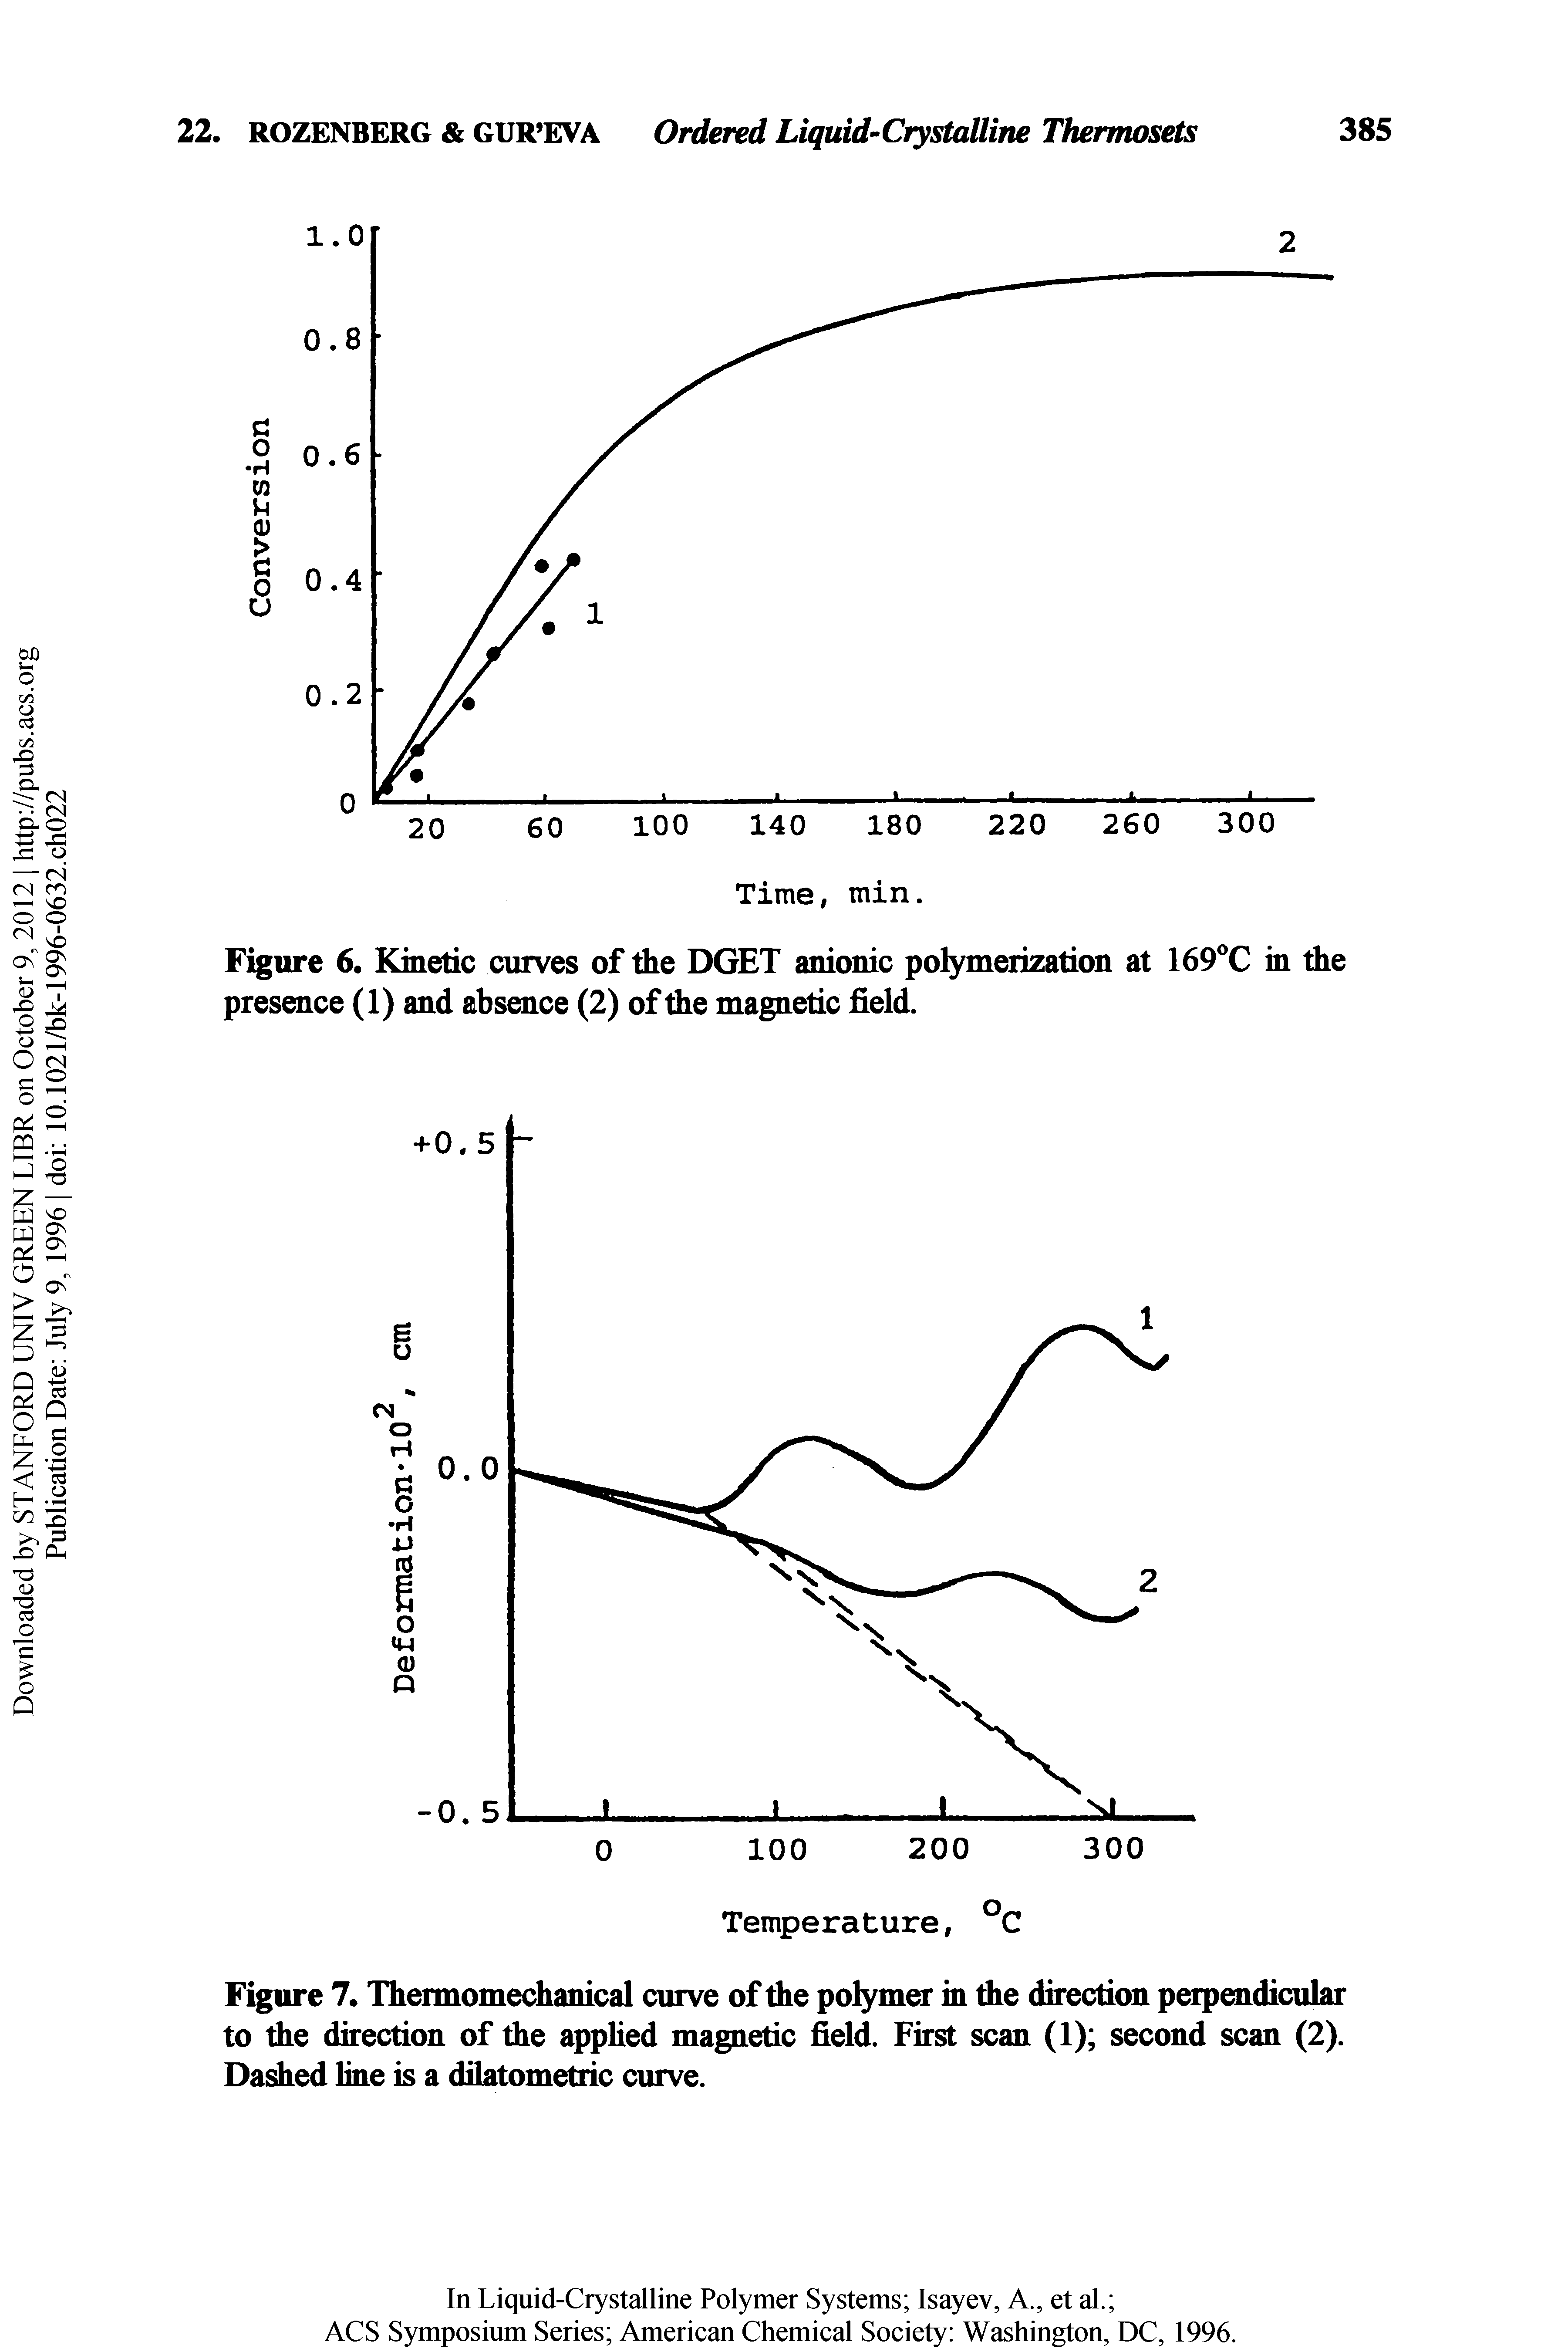 Figure 7. Thermomechanical curve of the polymer in the direction peipendicular to the direction of the applied magnetic field. First scan (1) second scan (2). Dashed line is a dilatometric curve.